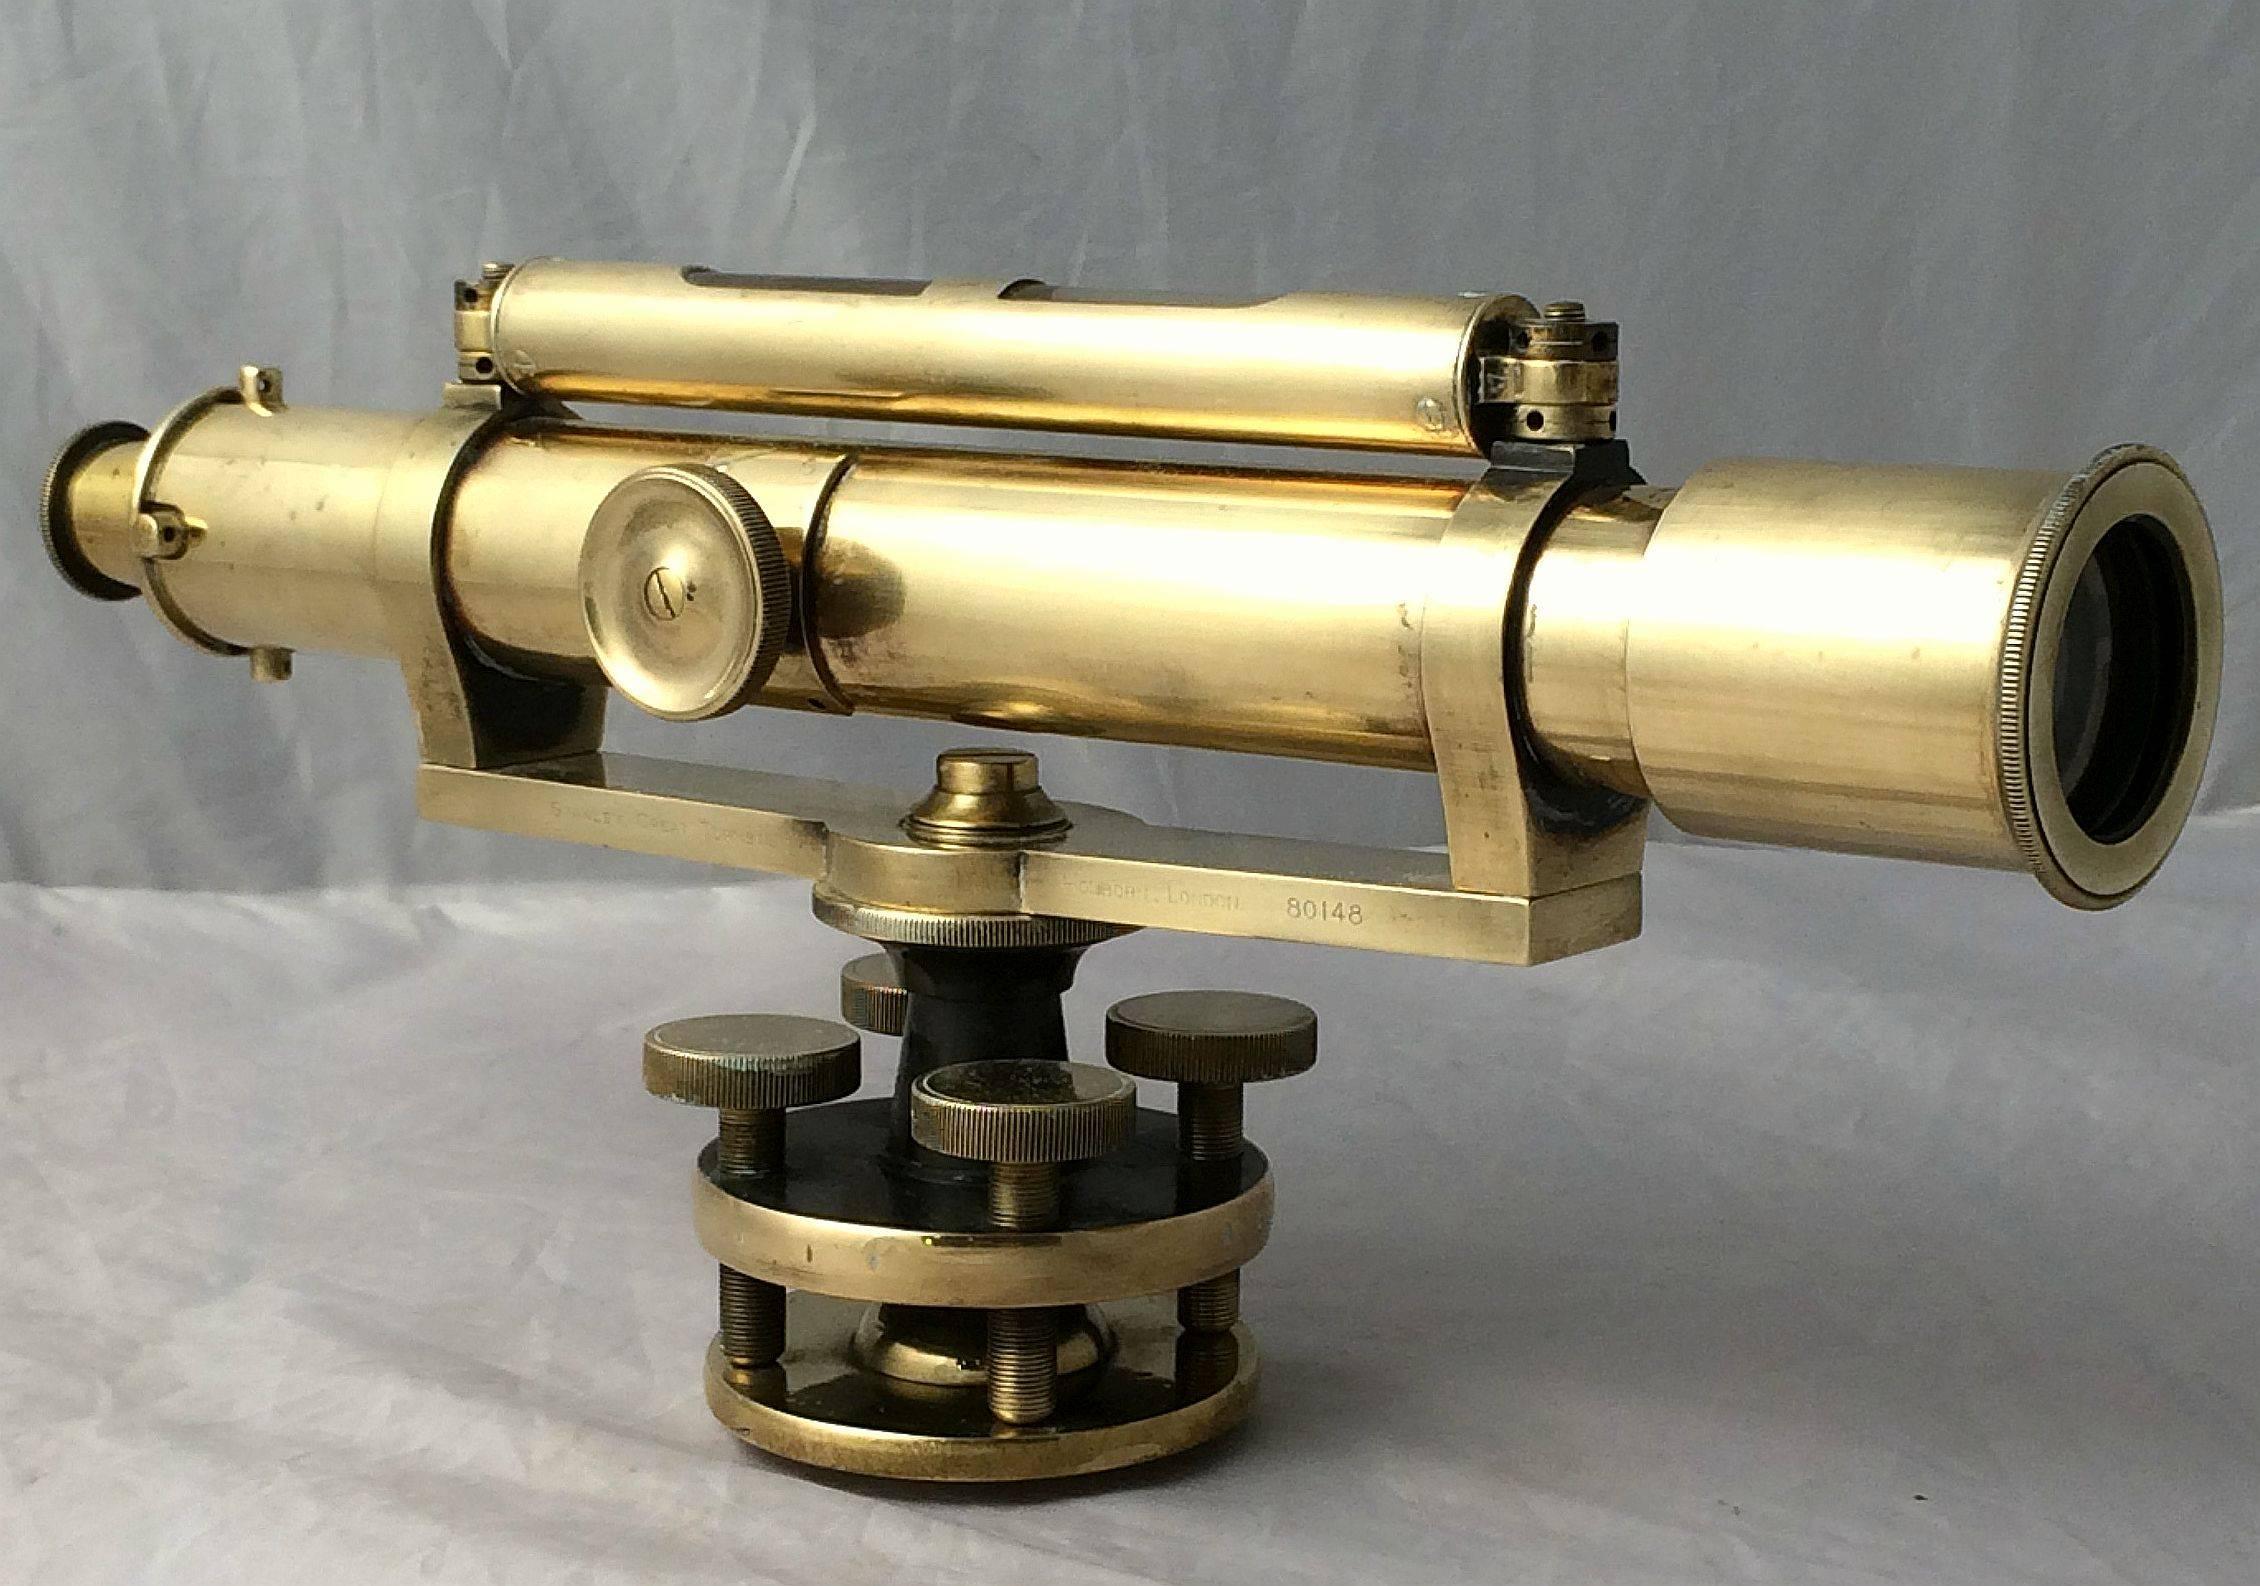 A fine working English surveyor's theodolite or transit instrument (aka a dumpy level or surveyors level) of brass, No.80148, by W.F. Stanley (Great Turnstile, Holborn, London), circa 1930, in original fitted wooden box. 
With attached spirit level